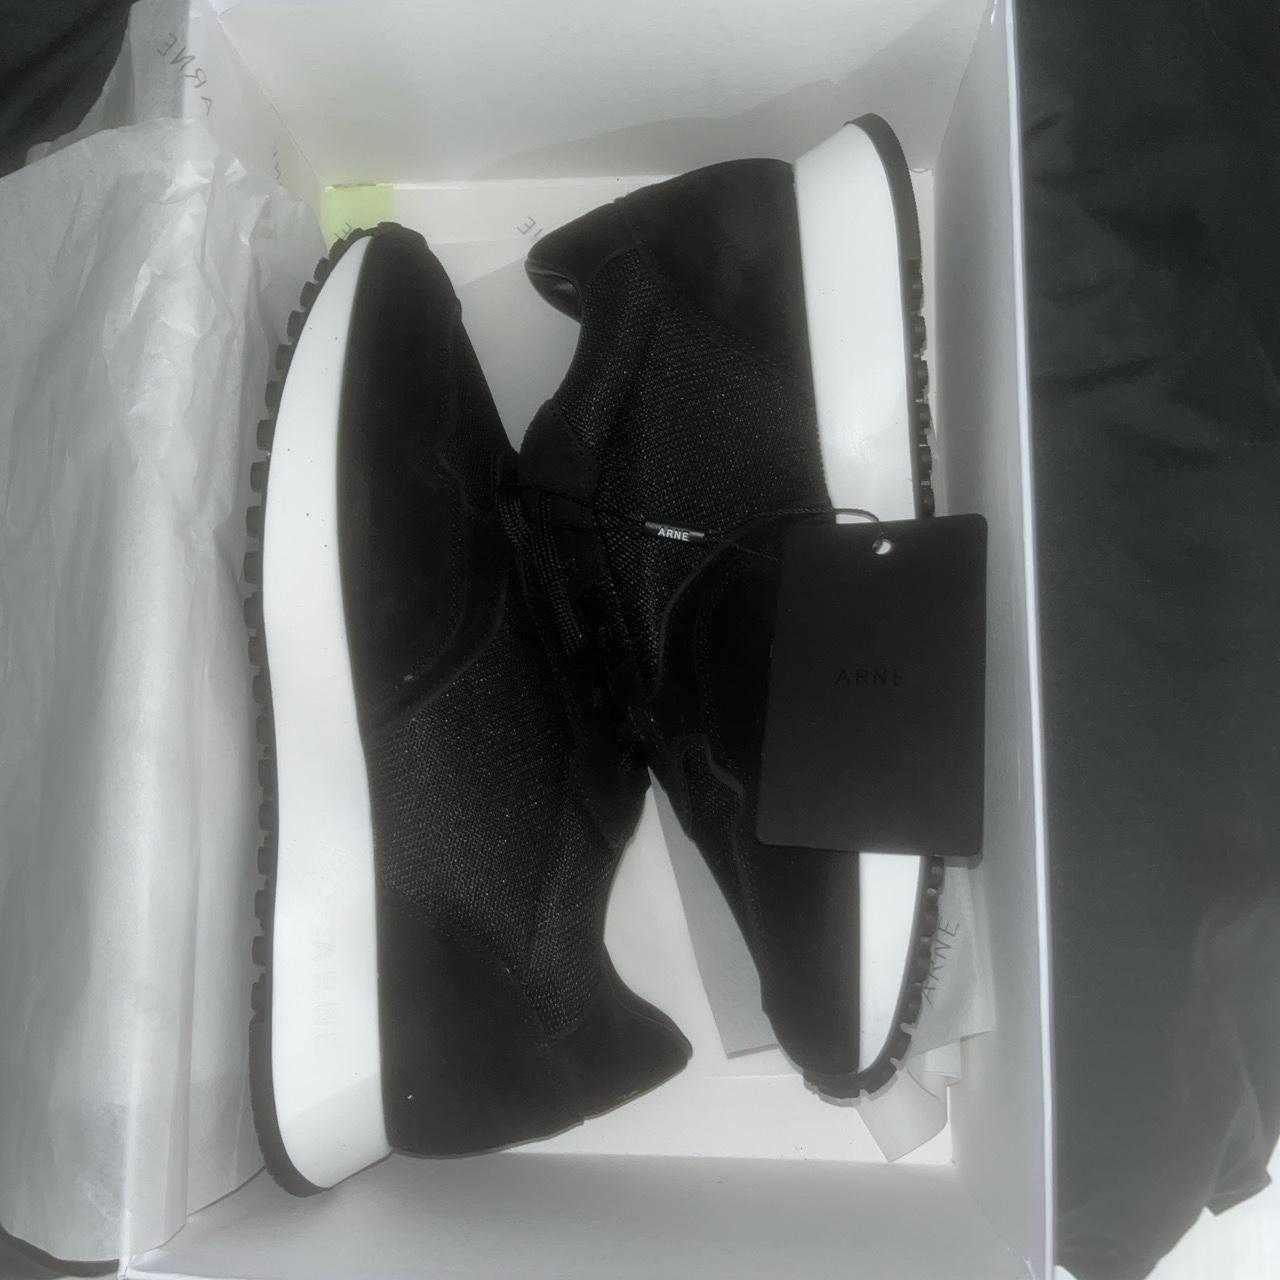 Brand new Arne track racer trainers In black with a... - Depop